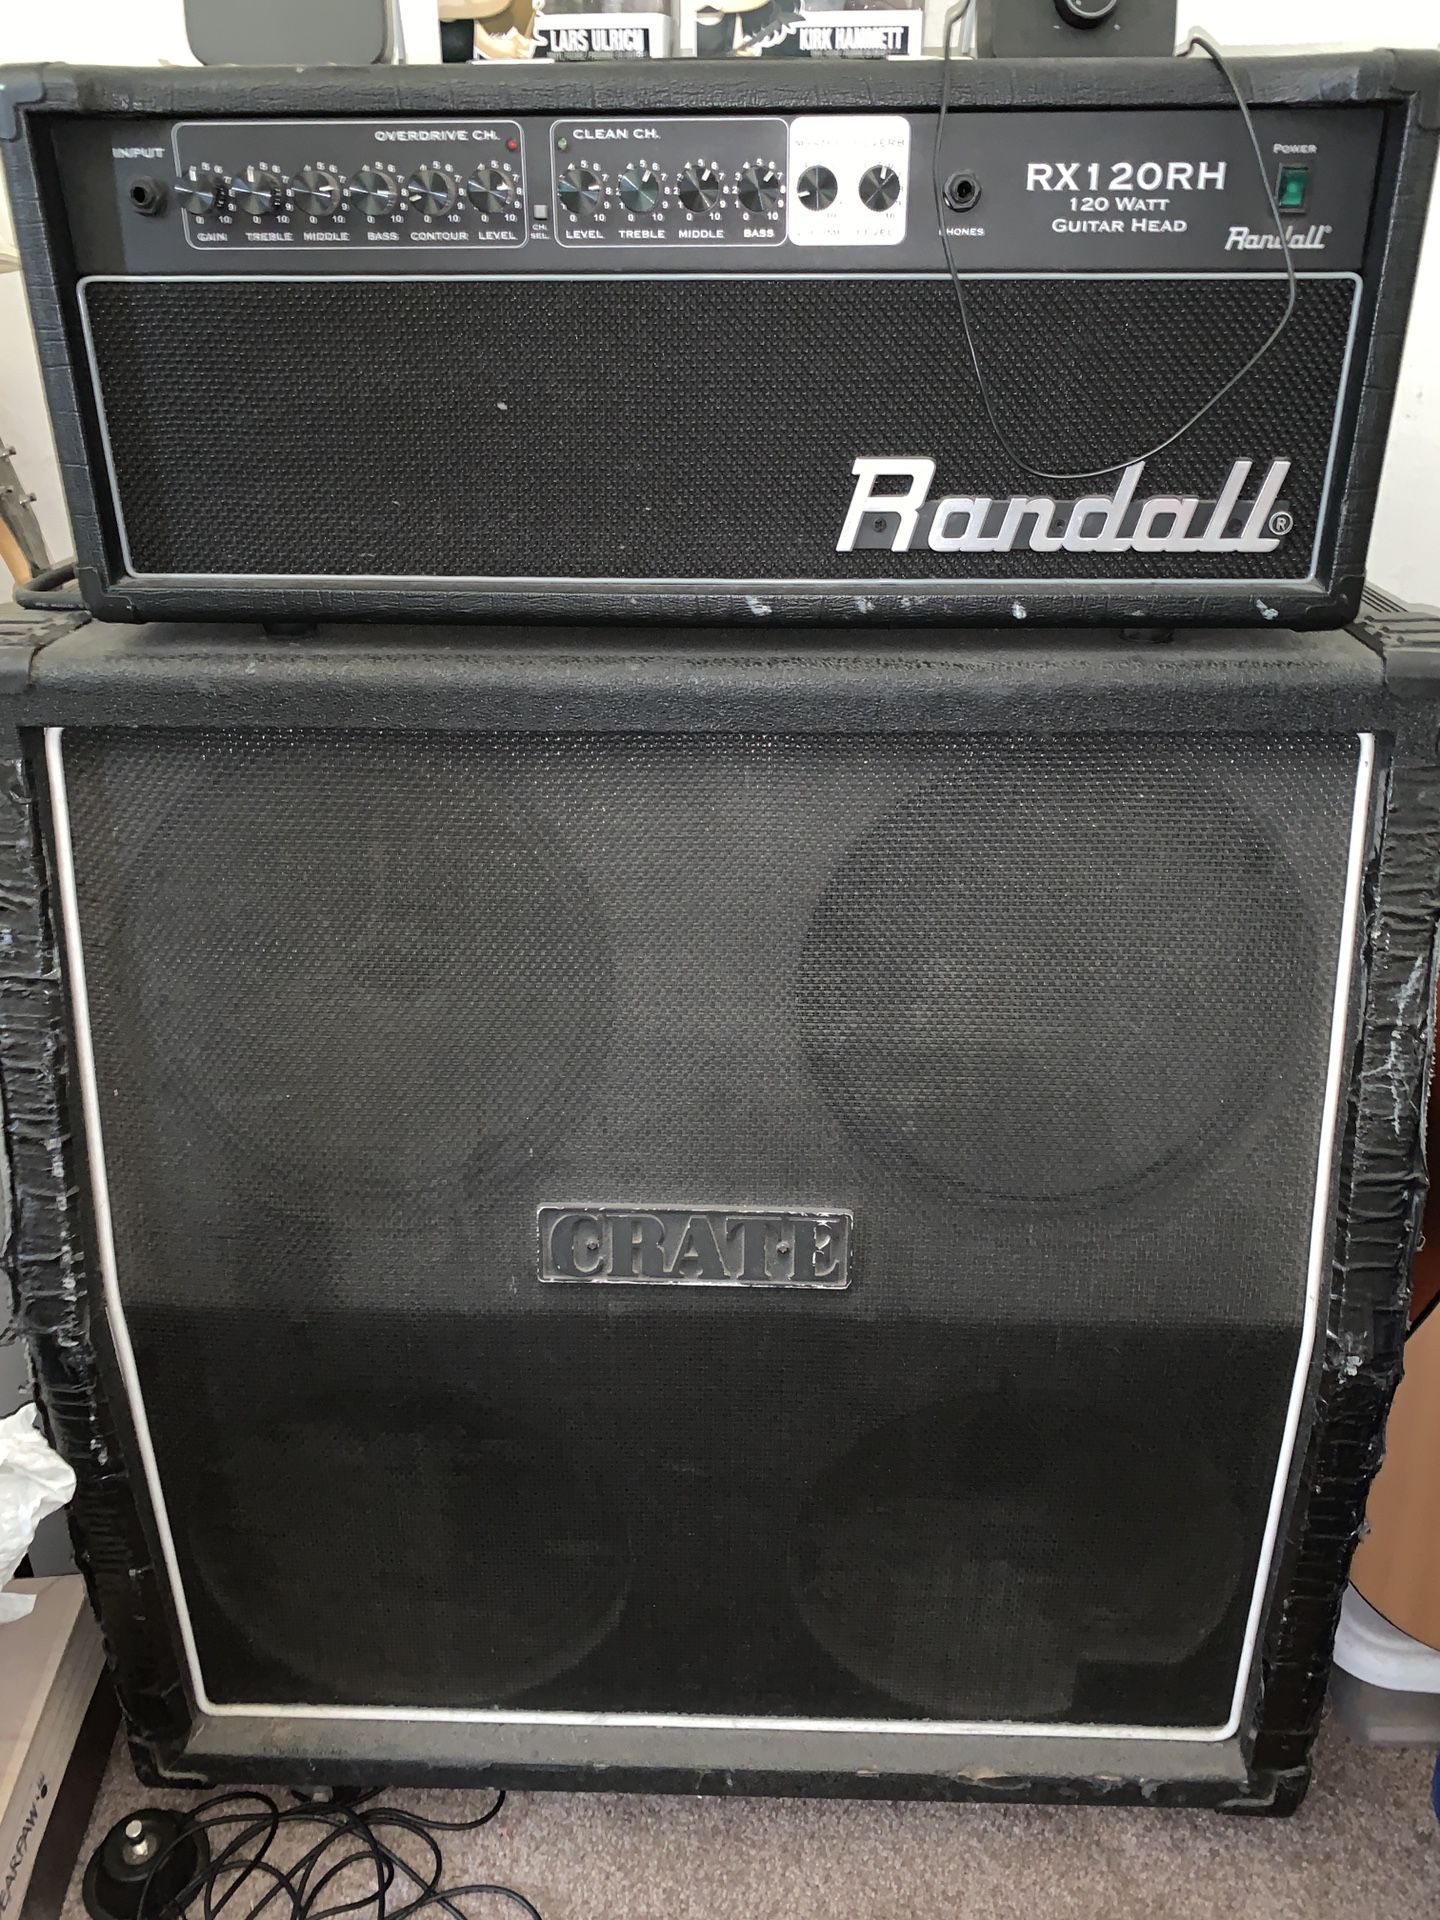 Randall Amp, Crate Cabinet, Foot Switch